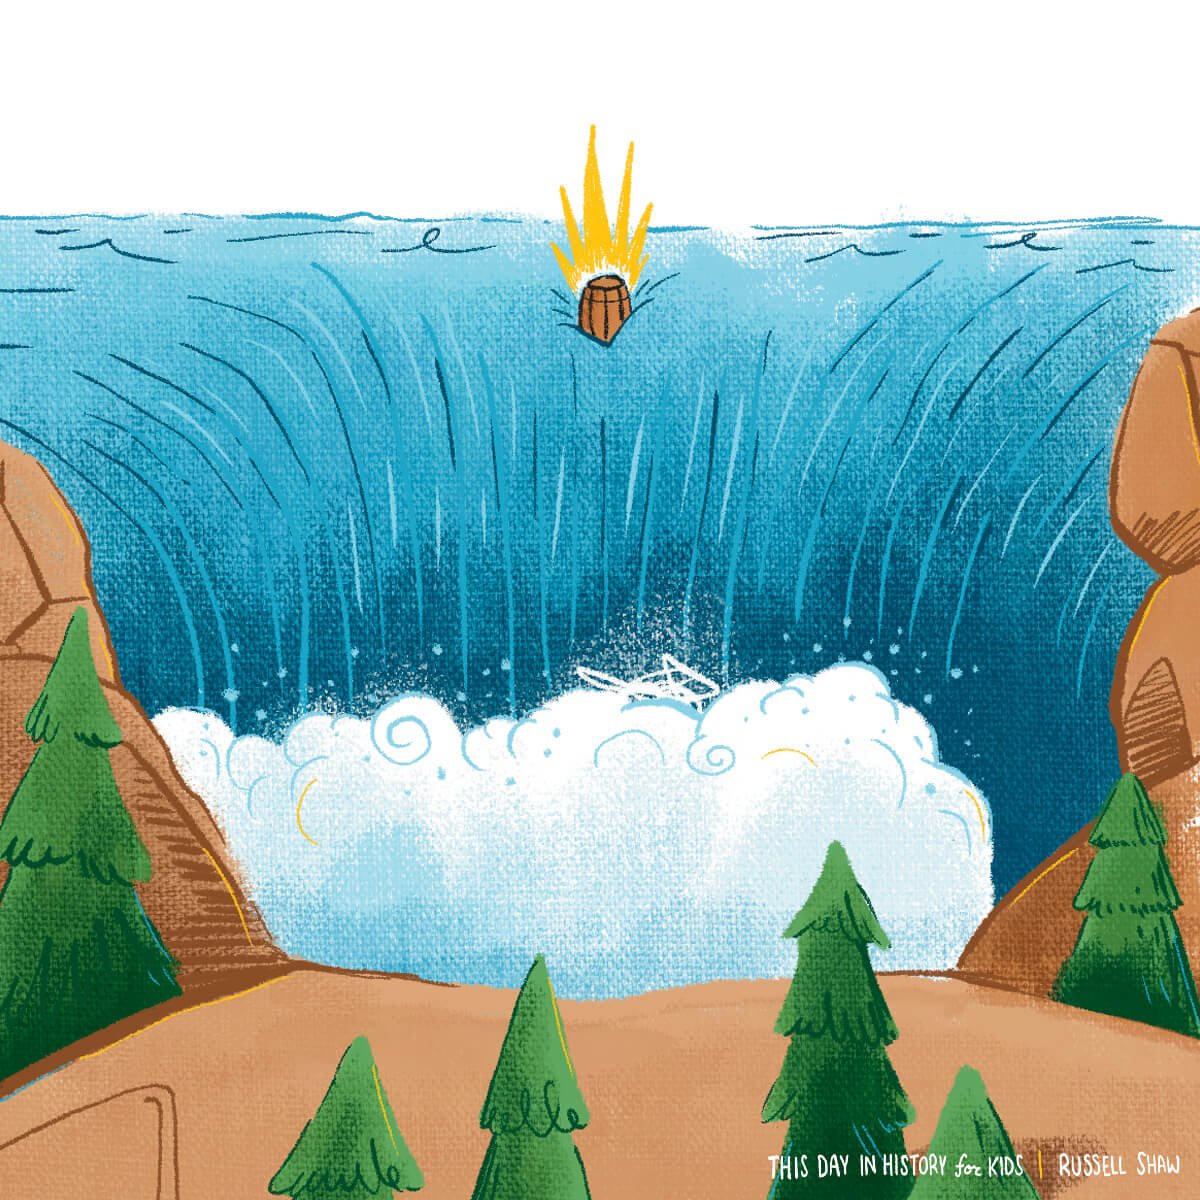  A whimsical illustrated scene showing a wooden barrel plunging into Niagra Falls in the water between cliff sides, with evergreen trees surrounding the area. 